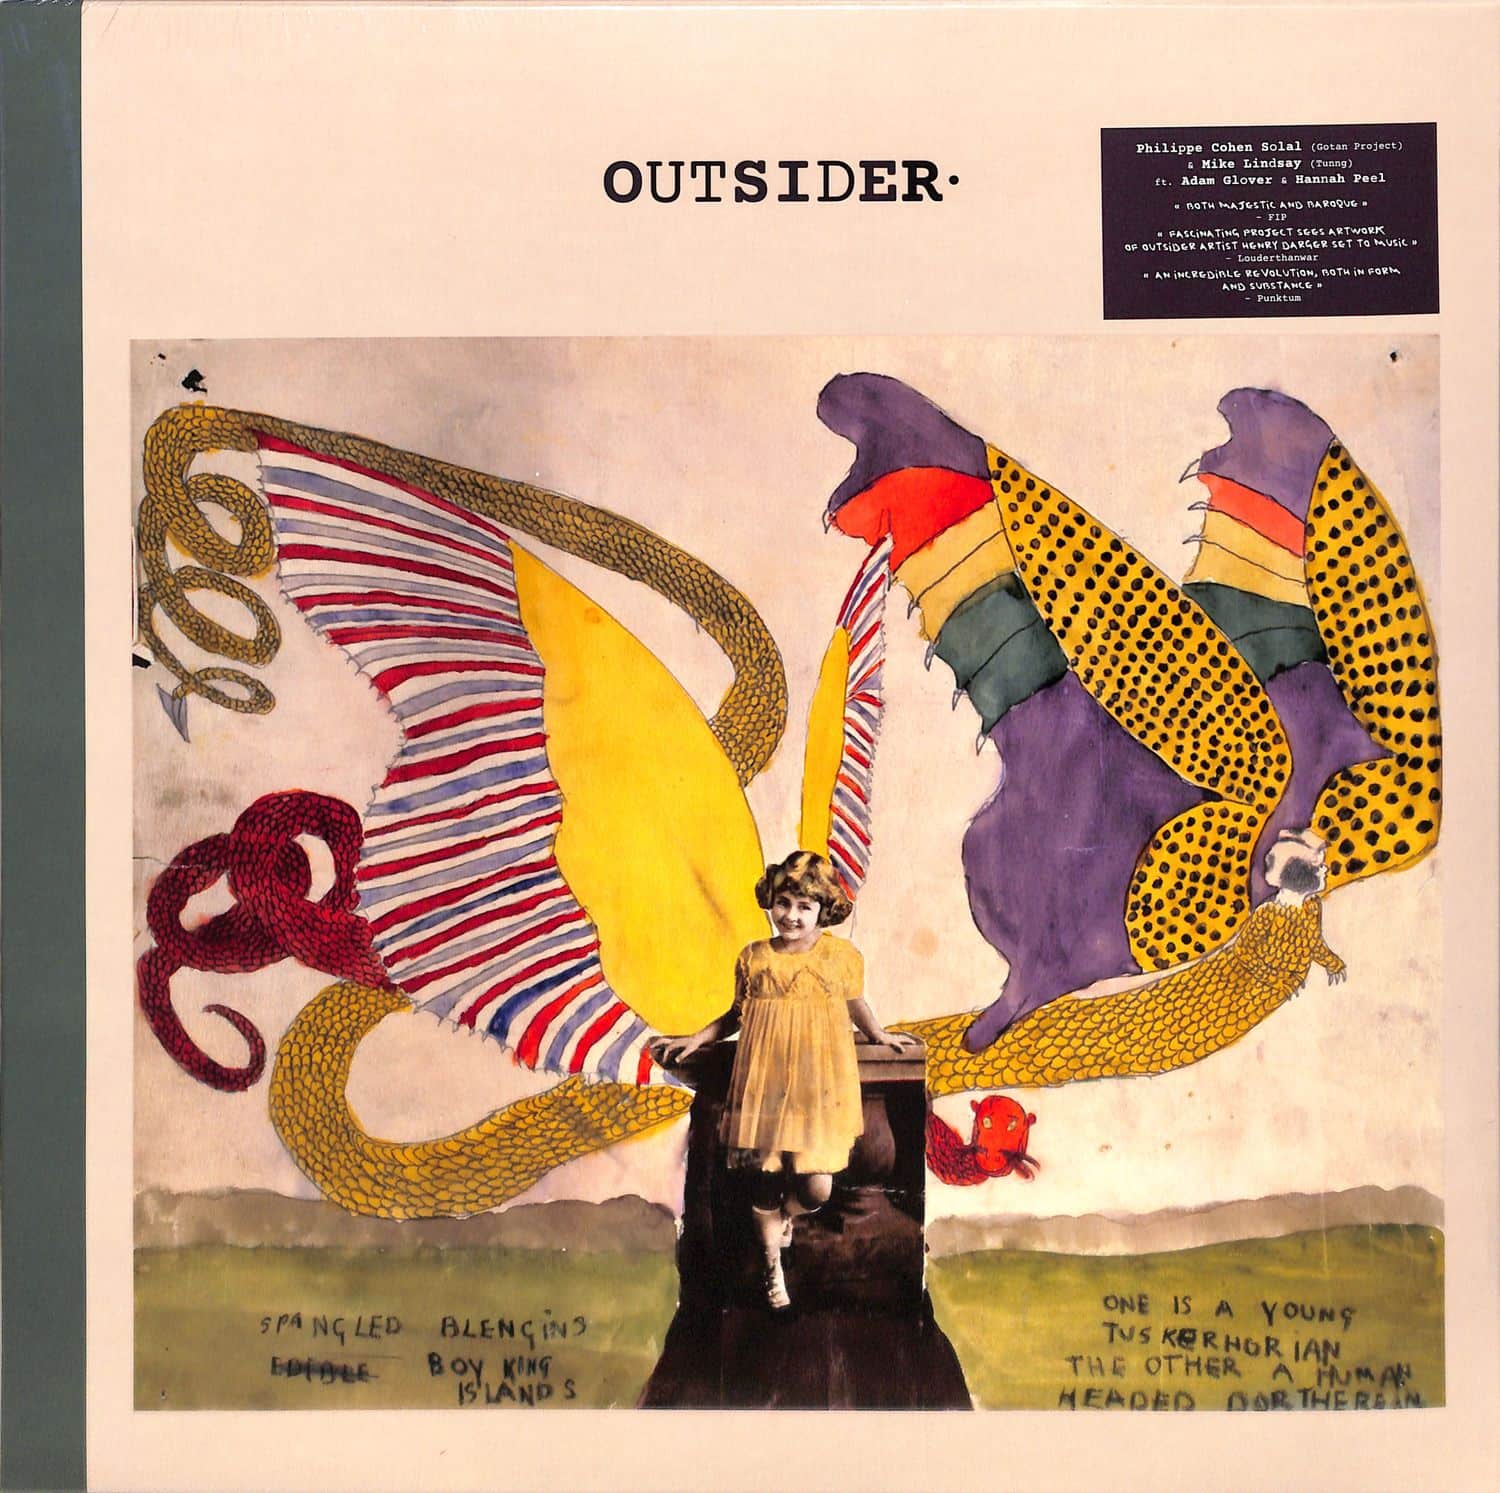 Philippe C. Solal & Mike Lindsay - OUTSIDER 